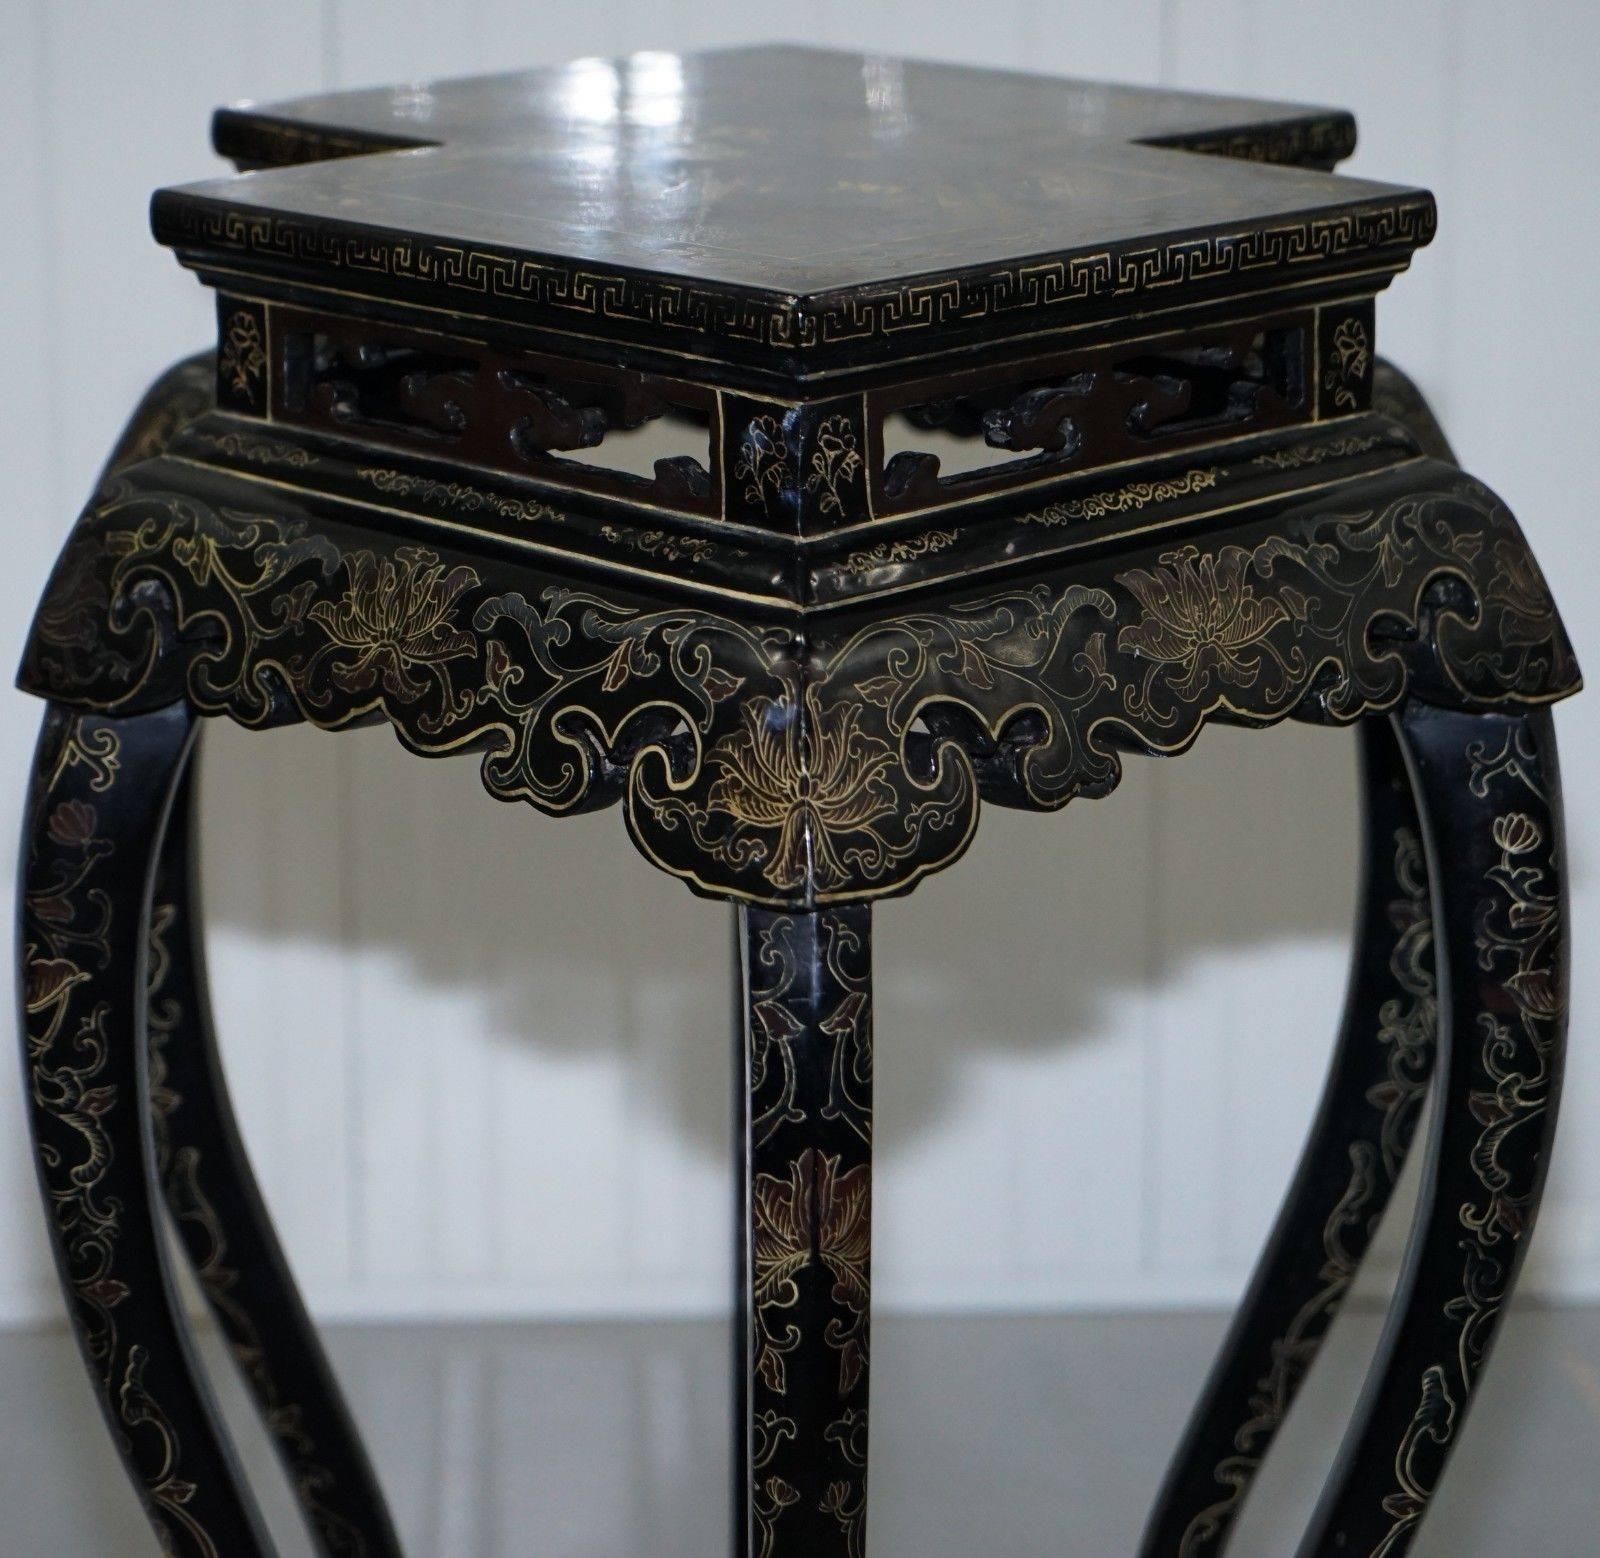 Hardwood Hand-Painted 19th Century Chinese Chinoiserie Lacquered Jardinière Plant Stand